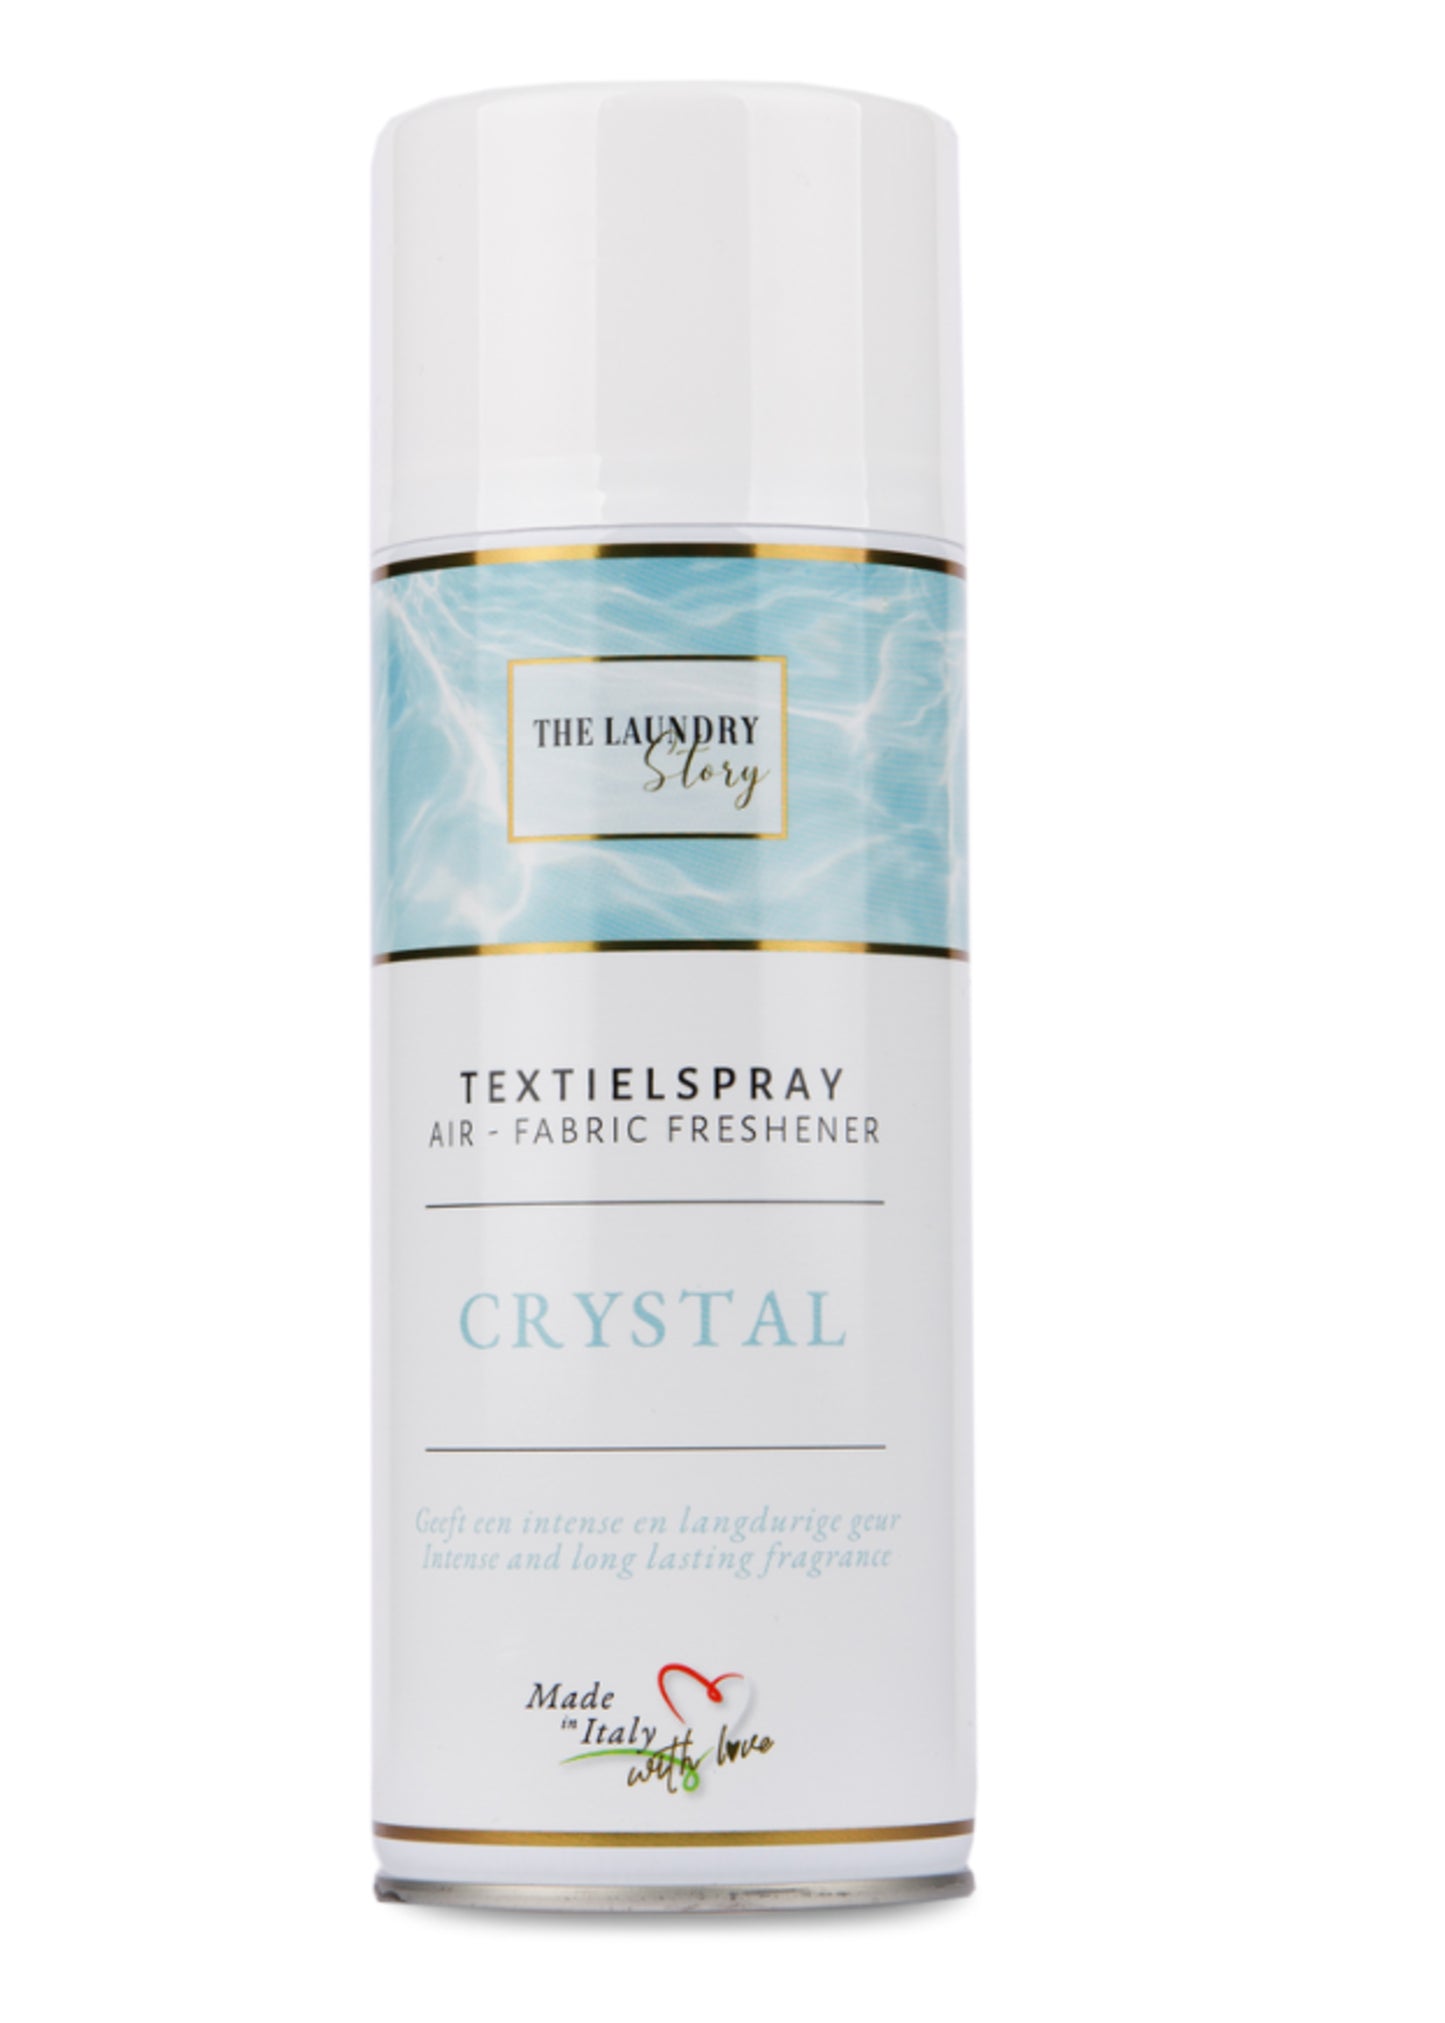 Textielspray | The Laundry Story ''Crystal''